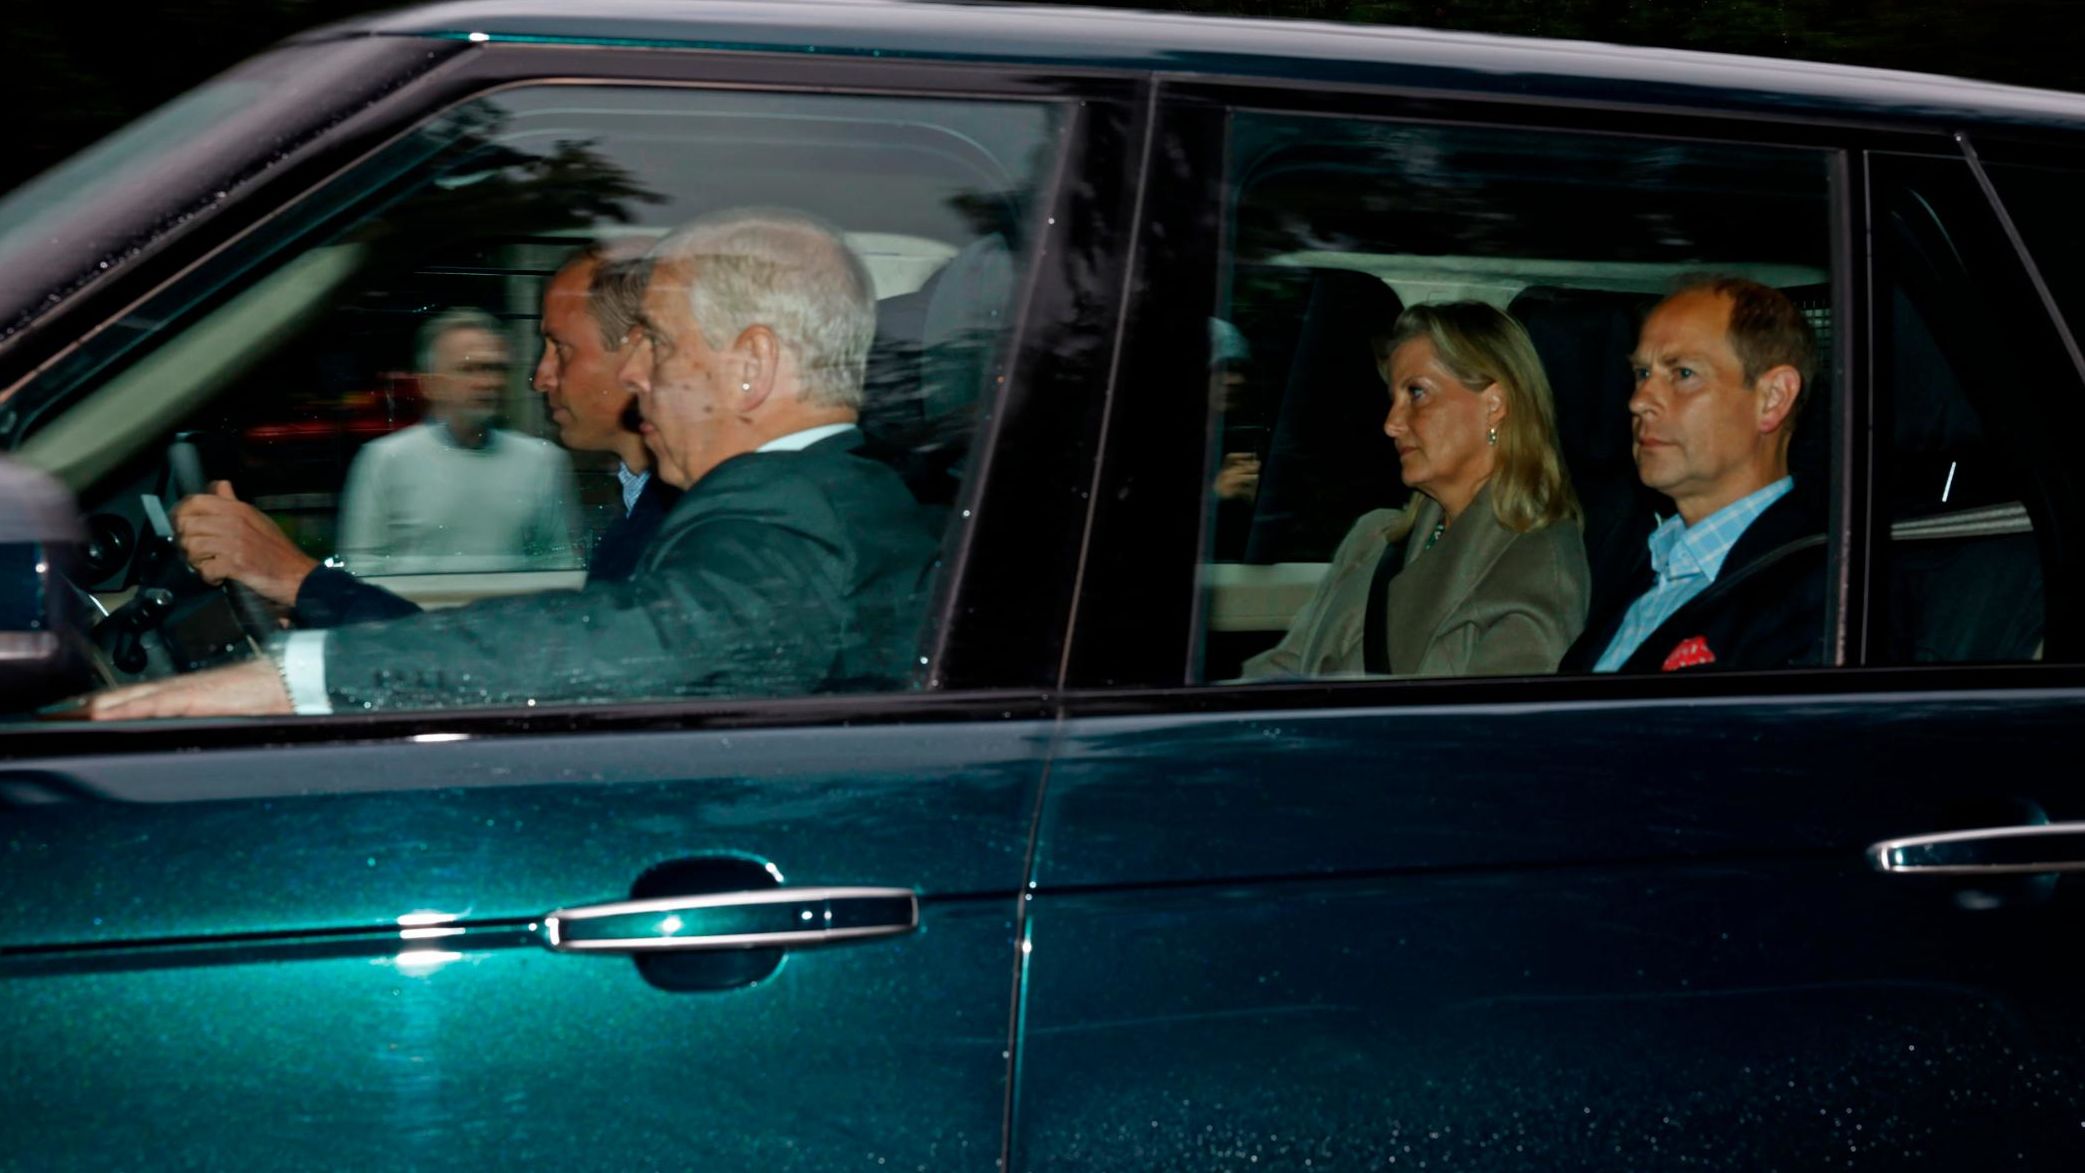 Britain's <a href="http://www.cnn.com/2022/09/08/world/gallery/prince-william/index.html" target="_blank">Prince William</a> drives Prince Andrew, Prince Edward and Sophie, Countess of Wessex, to Scotland's Balmoral Castle on Thursday, September 8. The death of Queen Elizabeth II was announced a short time later.